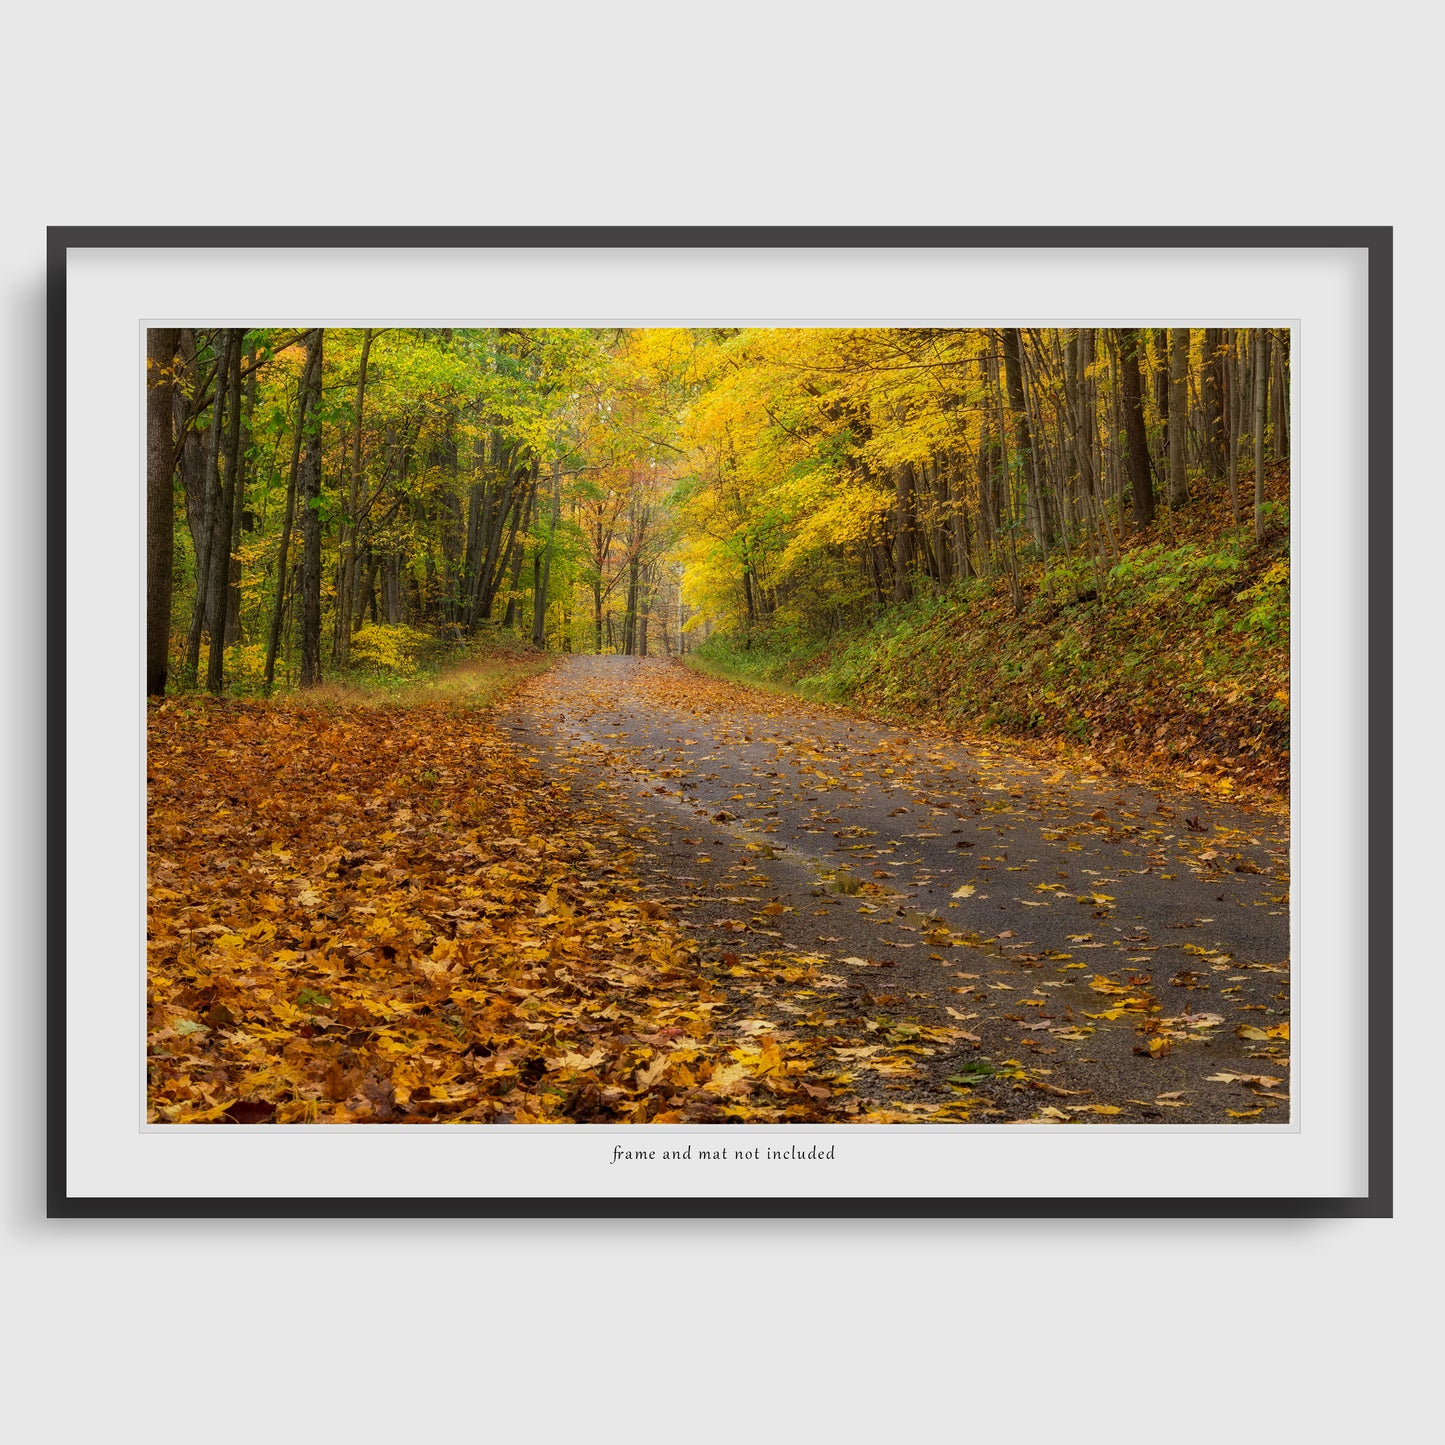 Autumn road image displaying a wall art print within a thin black frame and white mat, meant to inspire potential display options. The actual product is the print only; the frame and mat are not included with purchase.